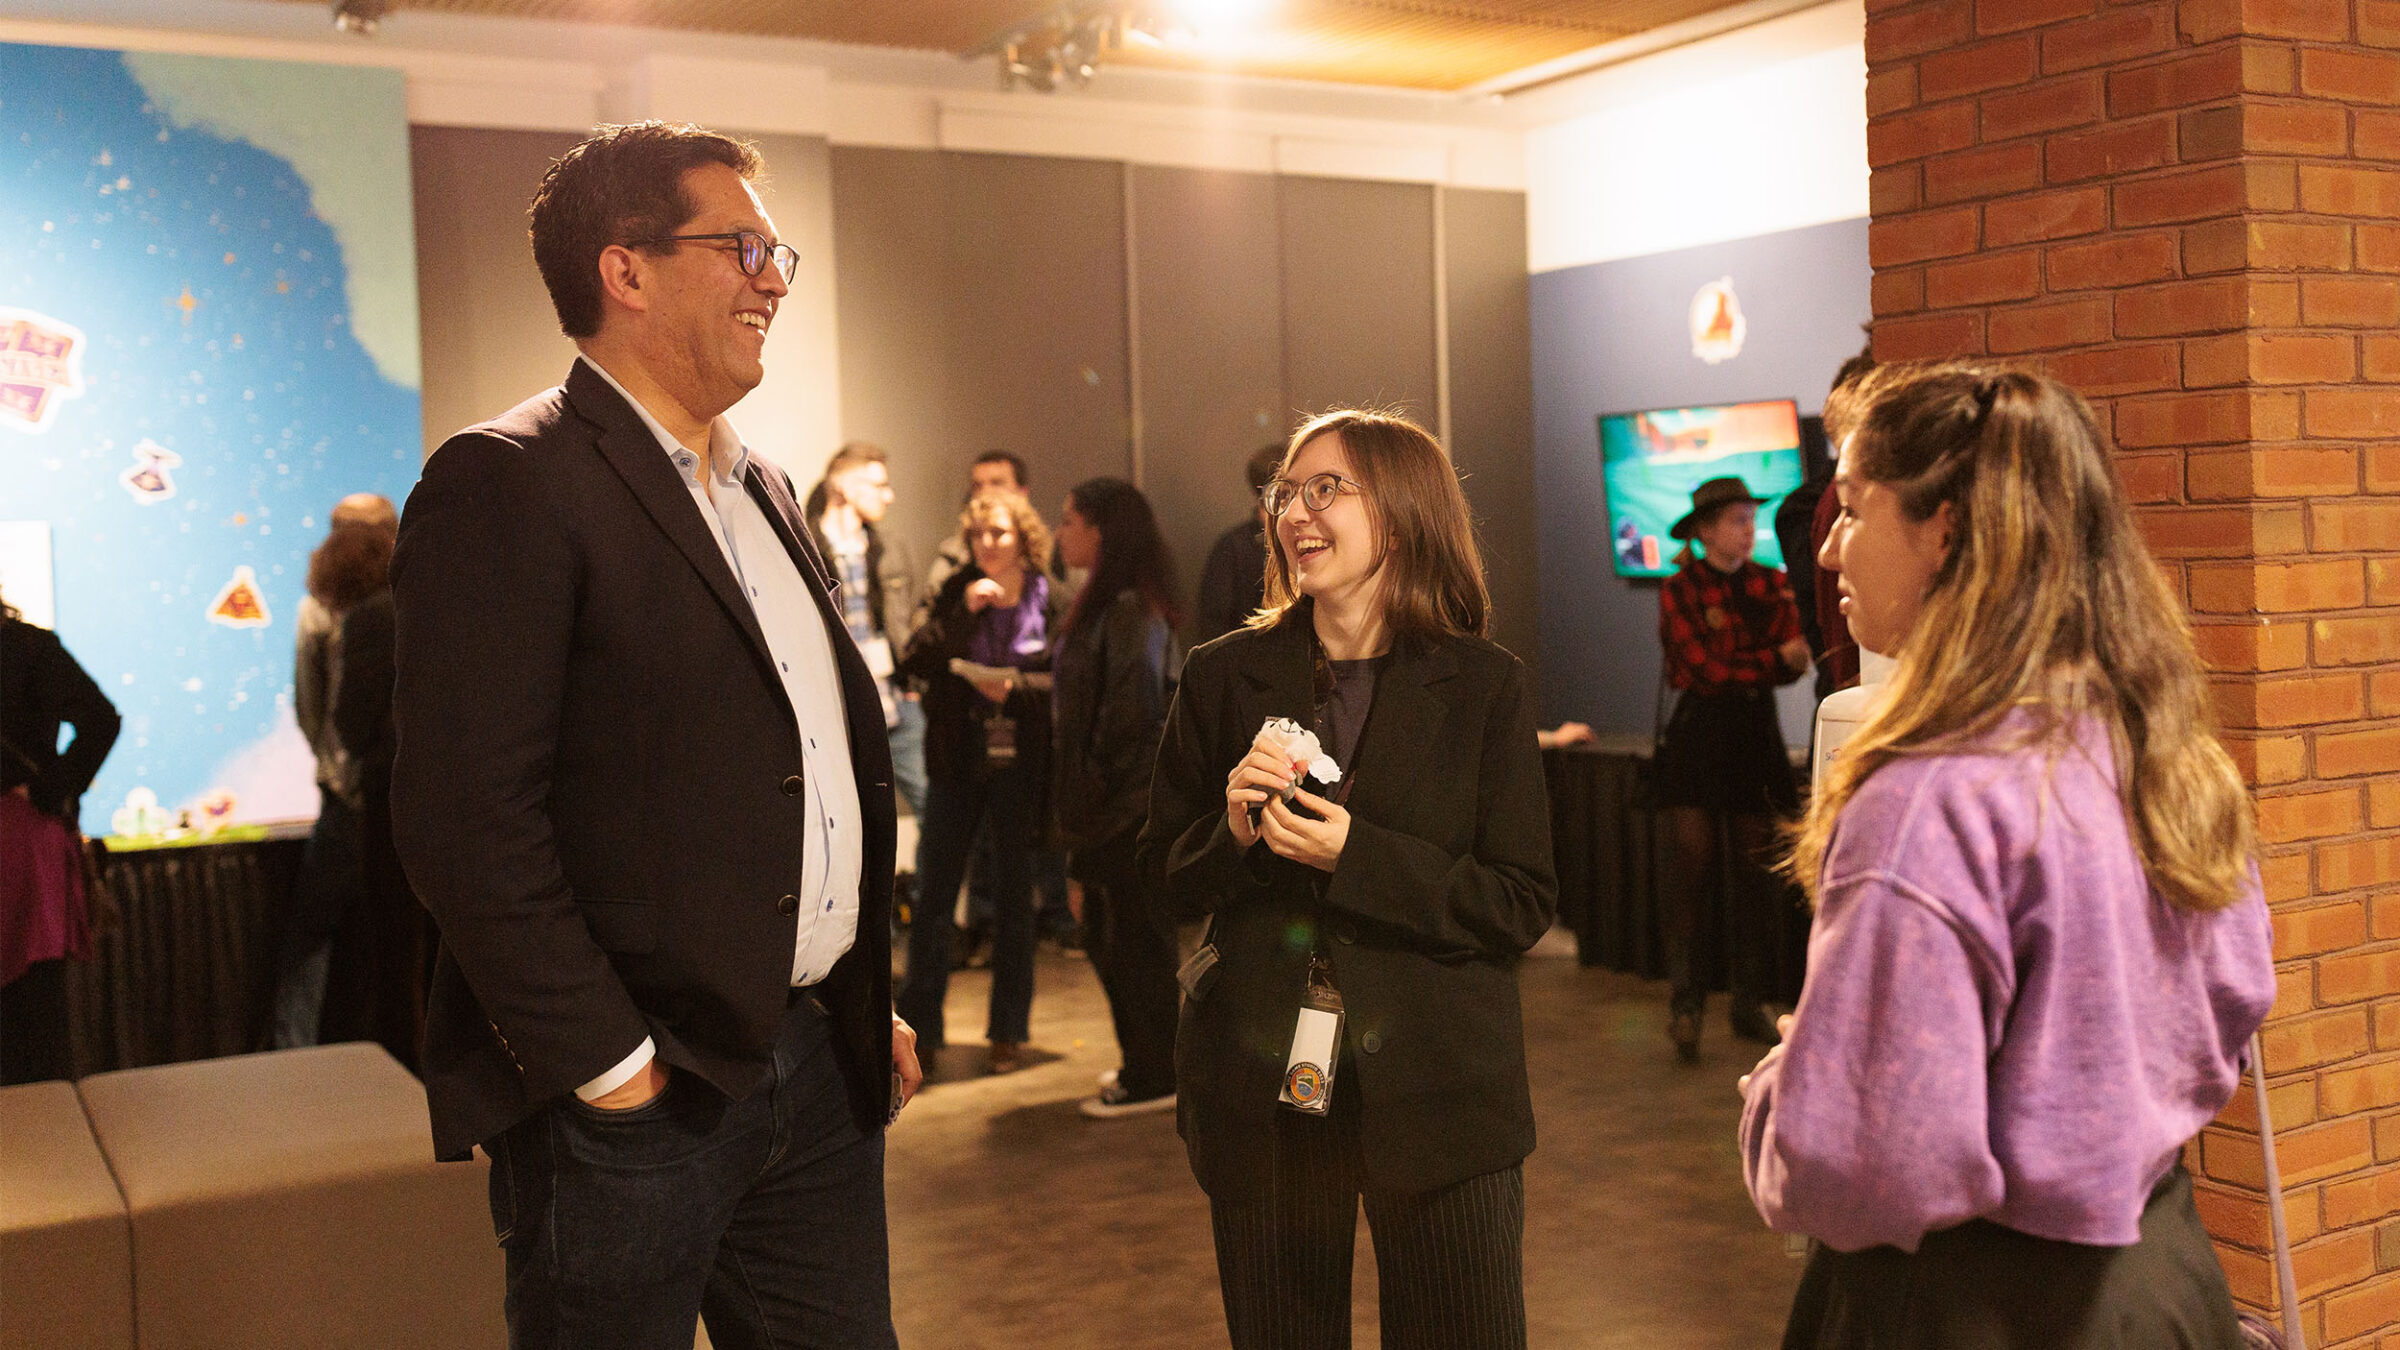 game studio student chatting with president alex hernandez at the game studio senior show reception event